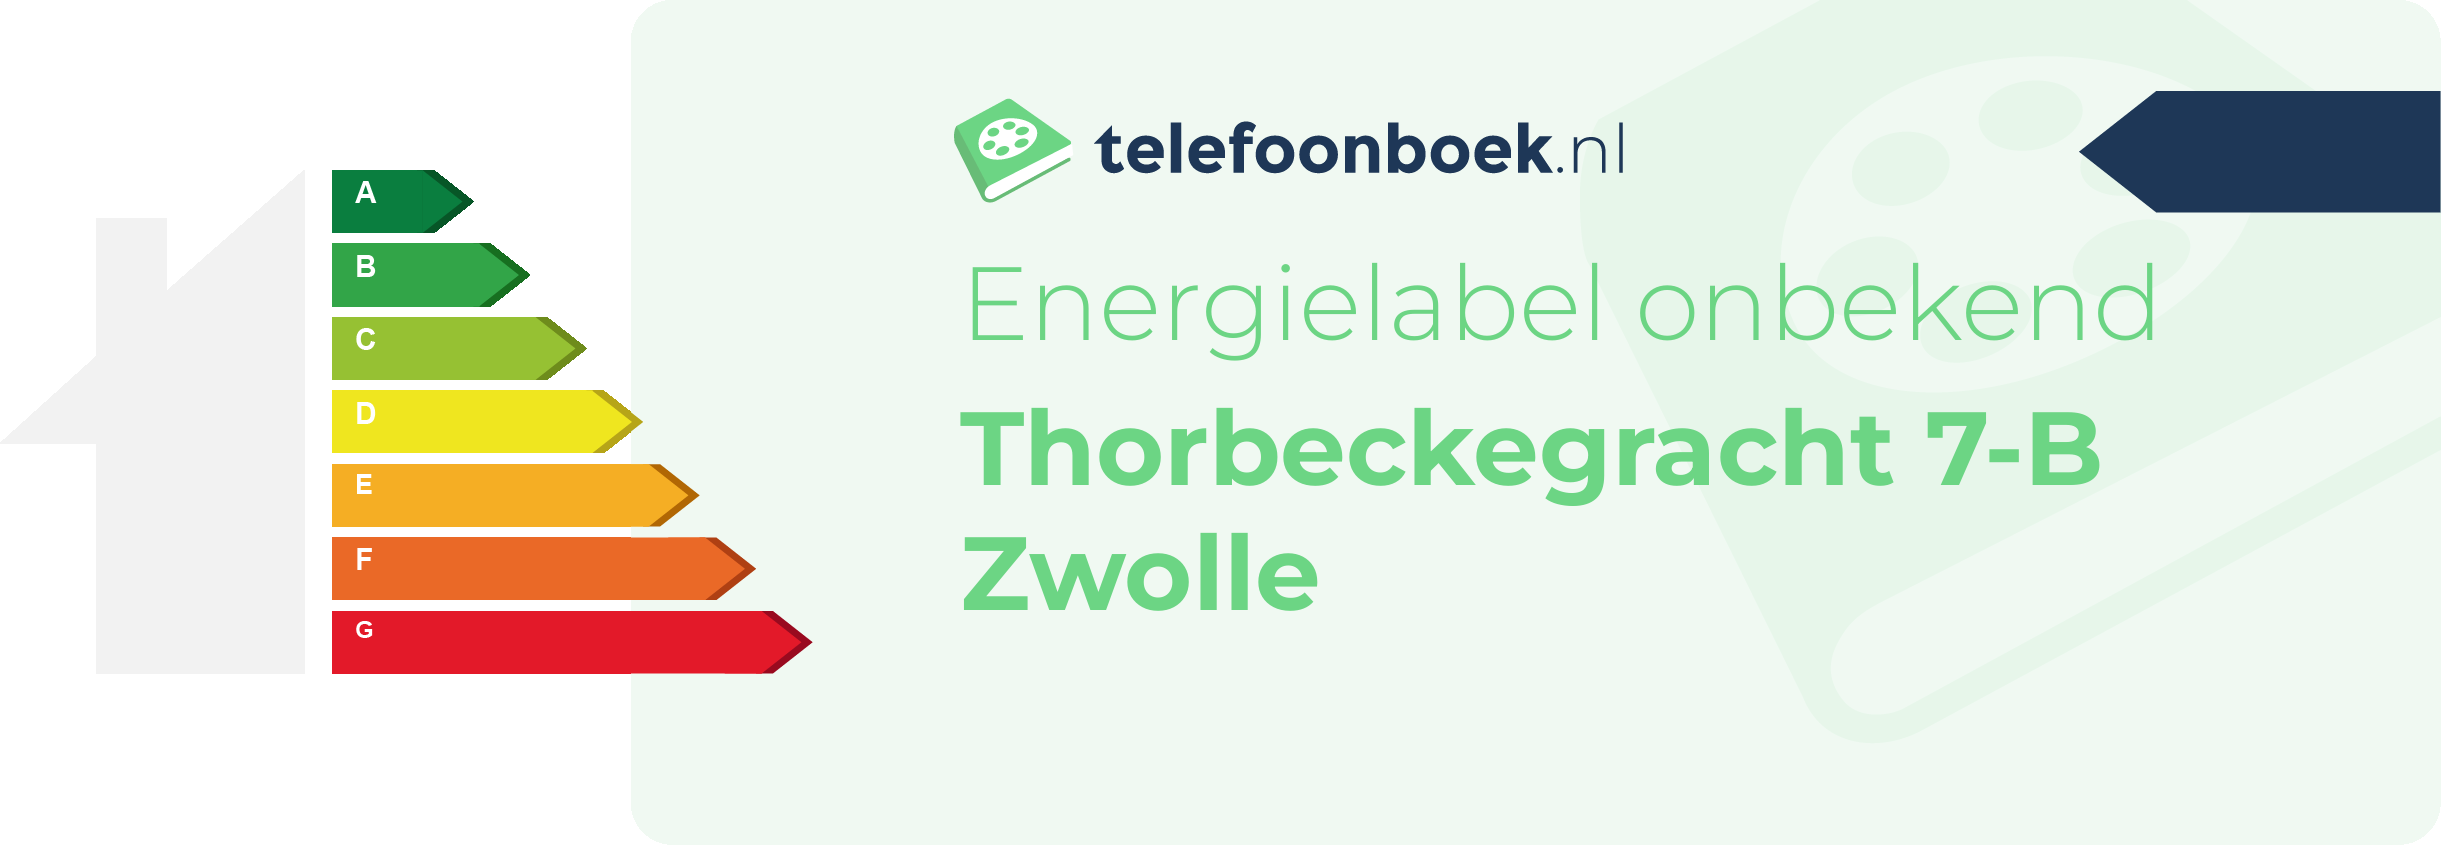 Energielabel Thorbeckegracht 7-B Zwolle